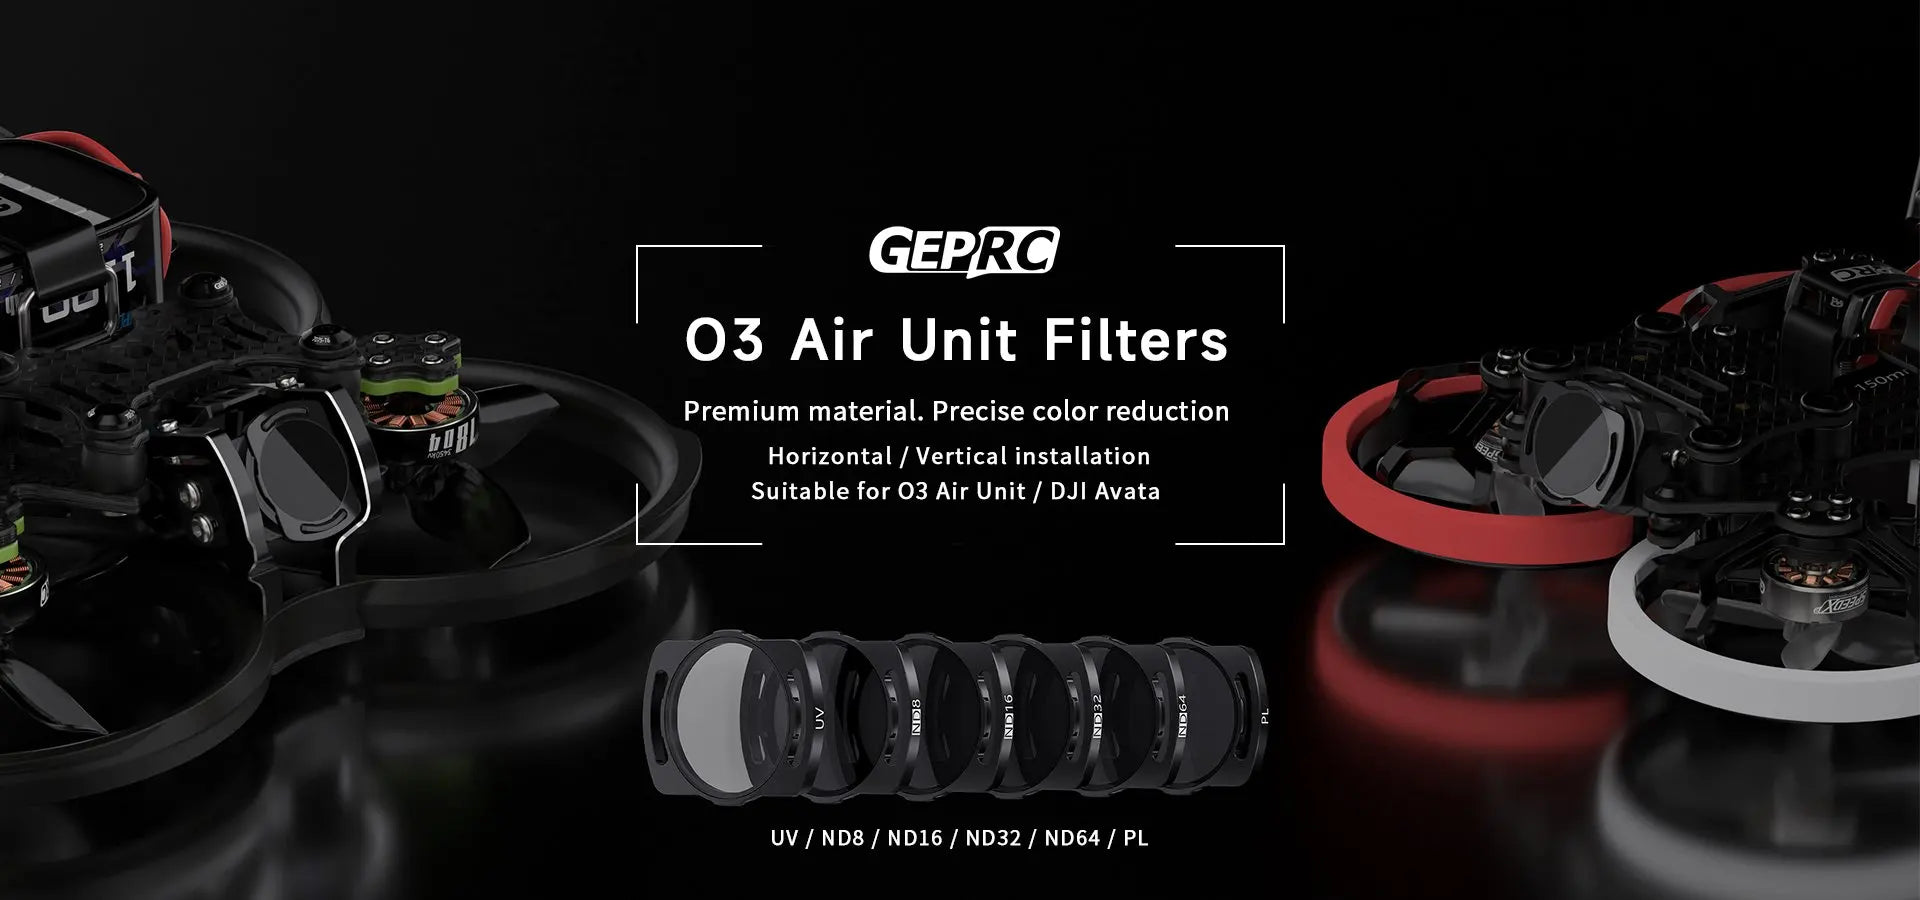 GEPRC O3 Air Unit ND Filter, GEPRC 03 Air Unit Filters 68 Premium material: Precise color reduction